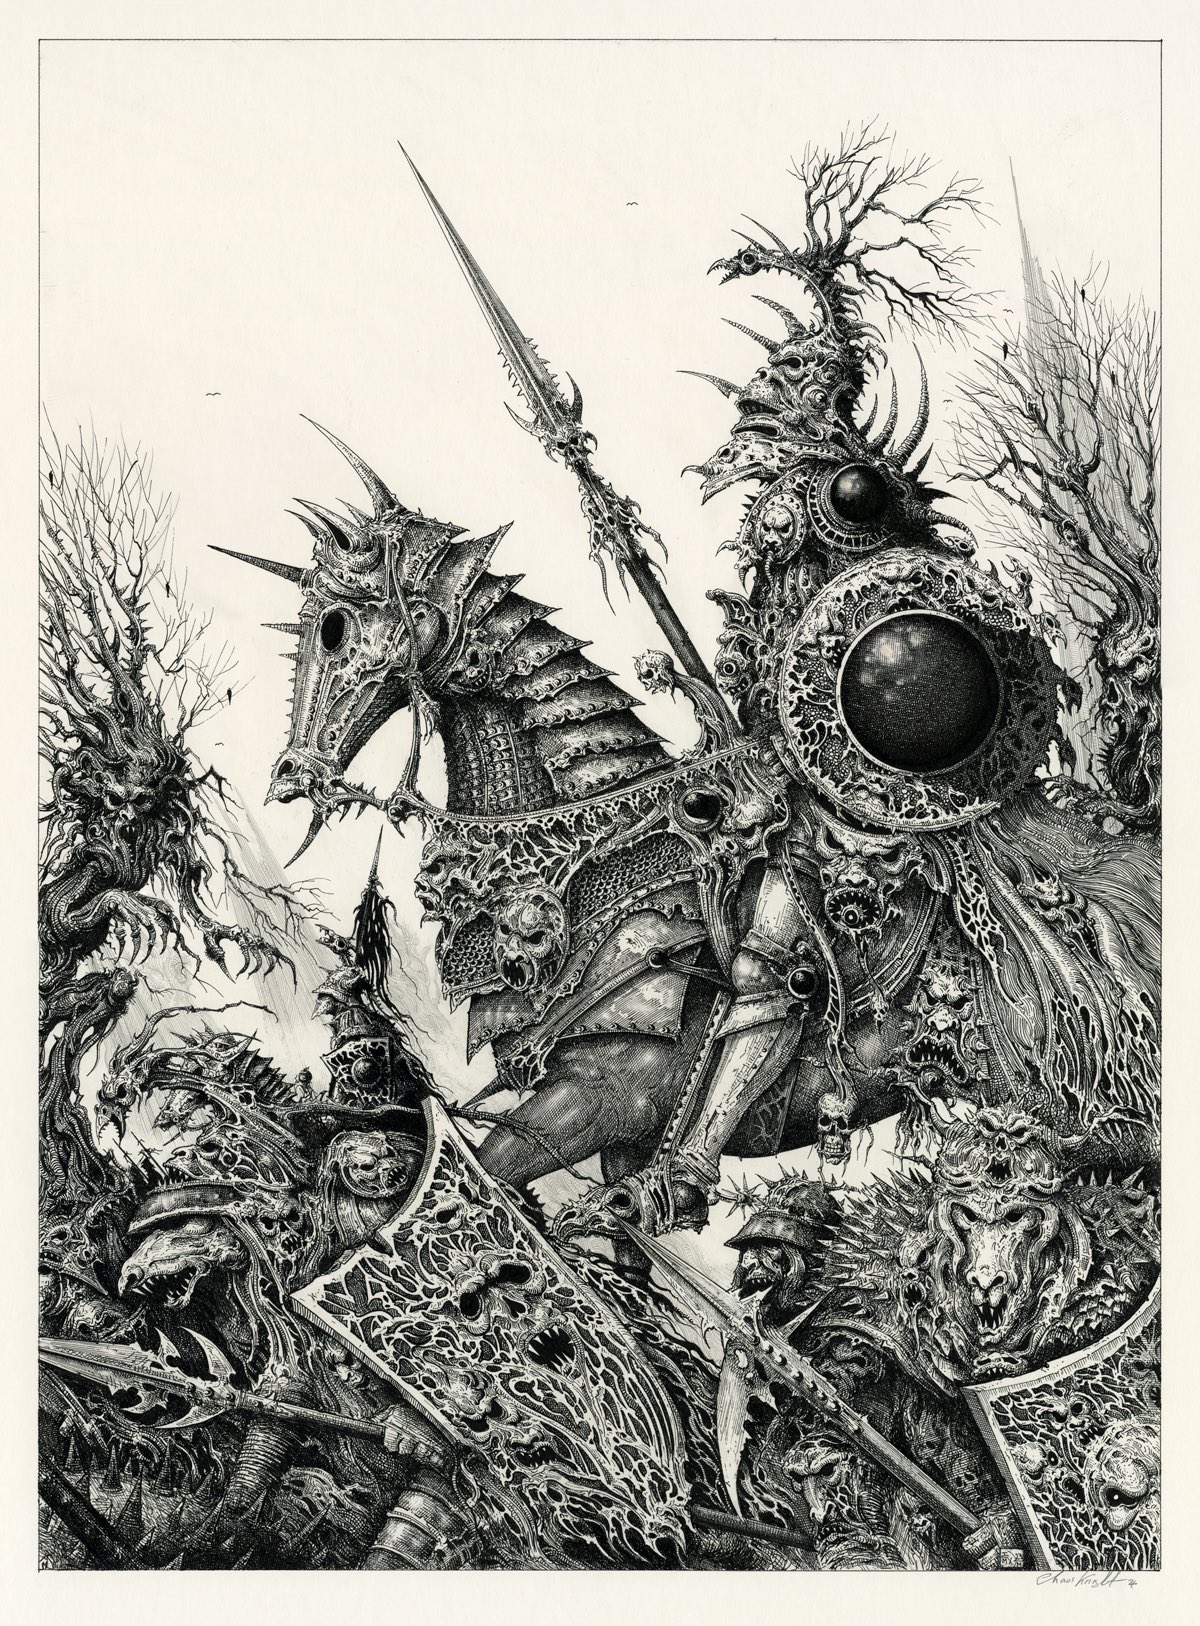 Ian Miller Chaos Knight Number 4